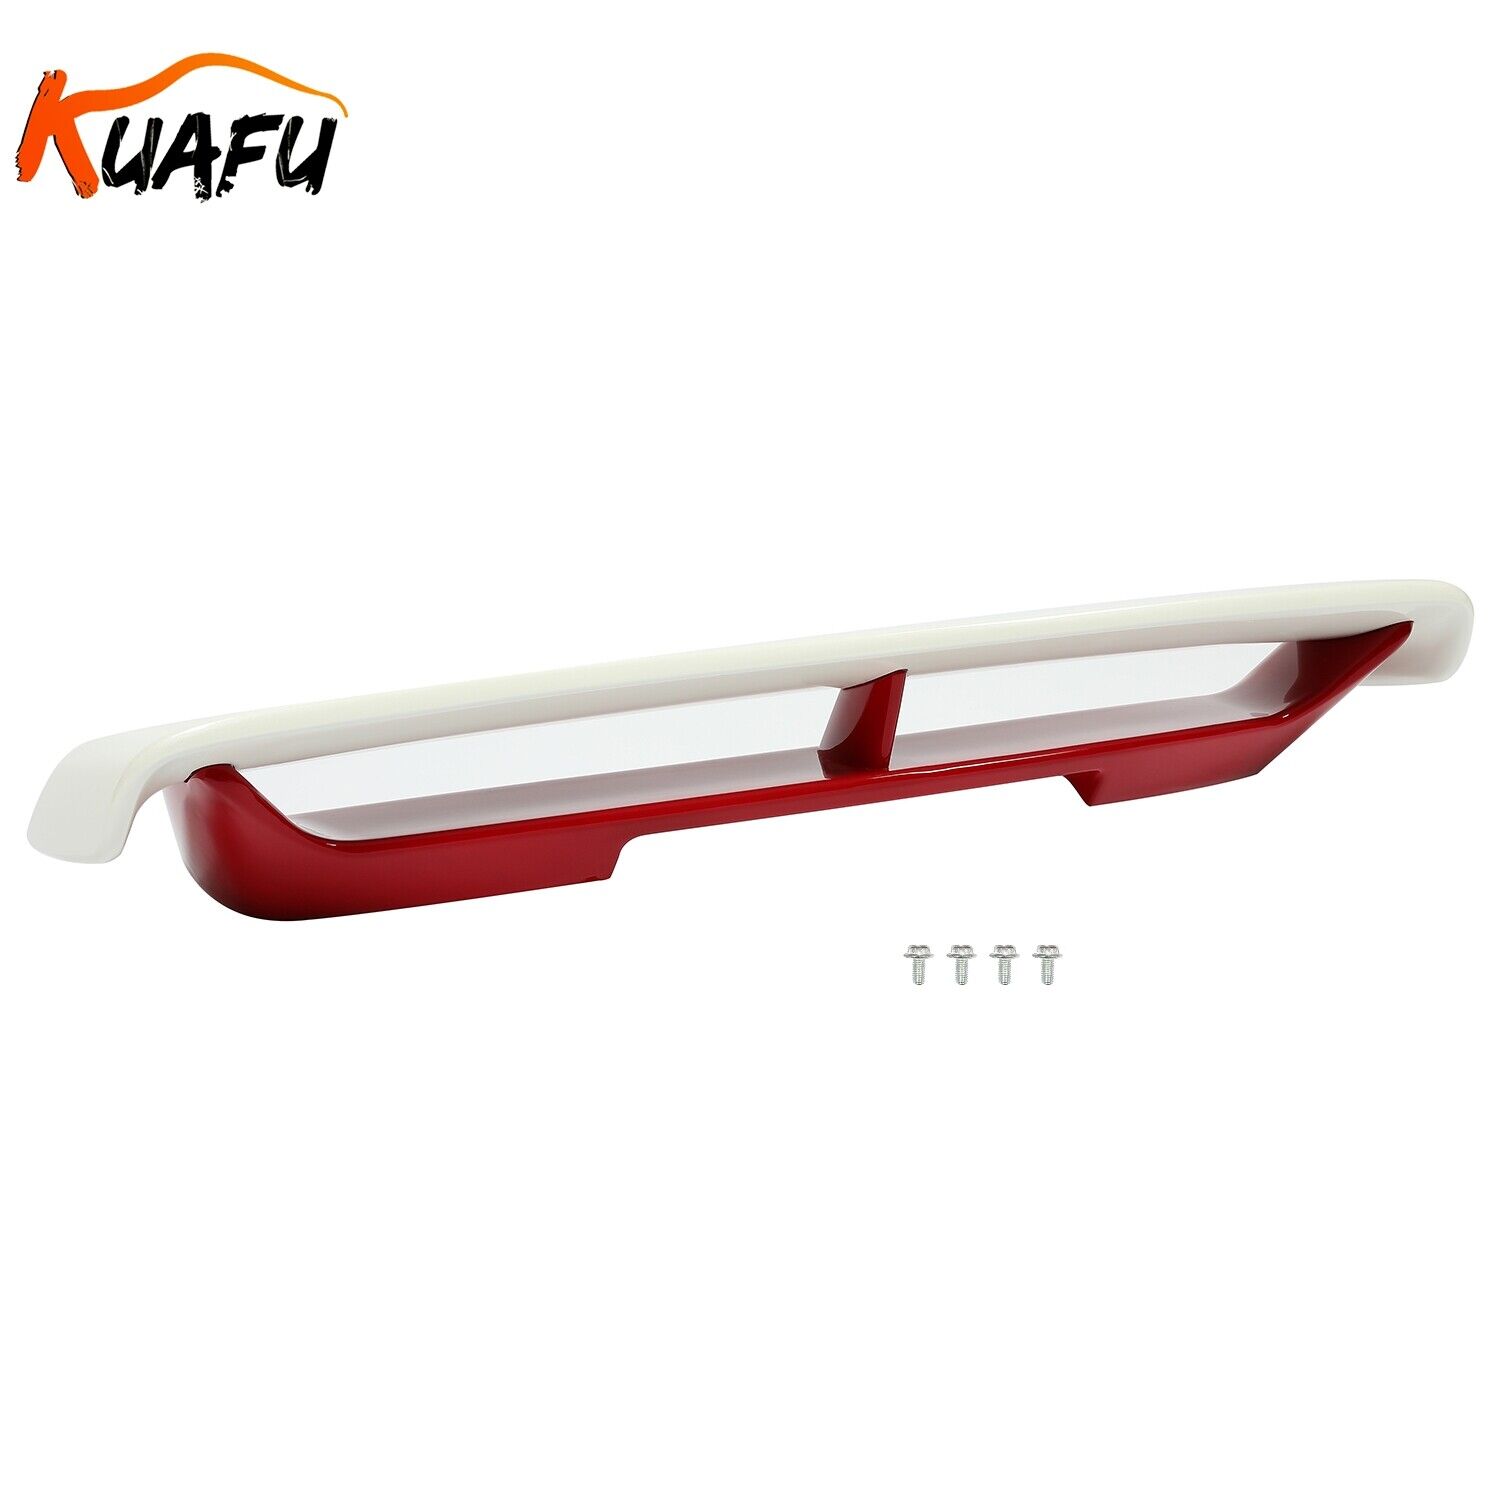 KUAFU Rear Trunk Lip Spoiler Wing Painted For 09-21 Nissan 370Z Nismo style